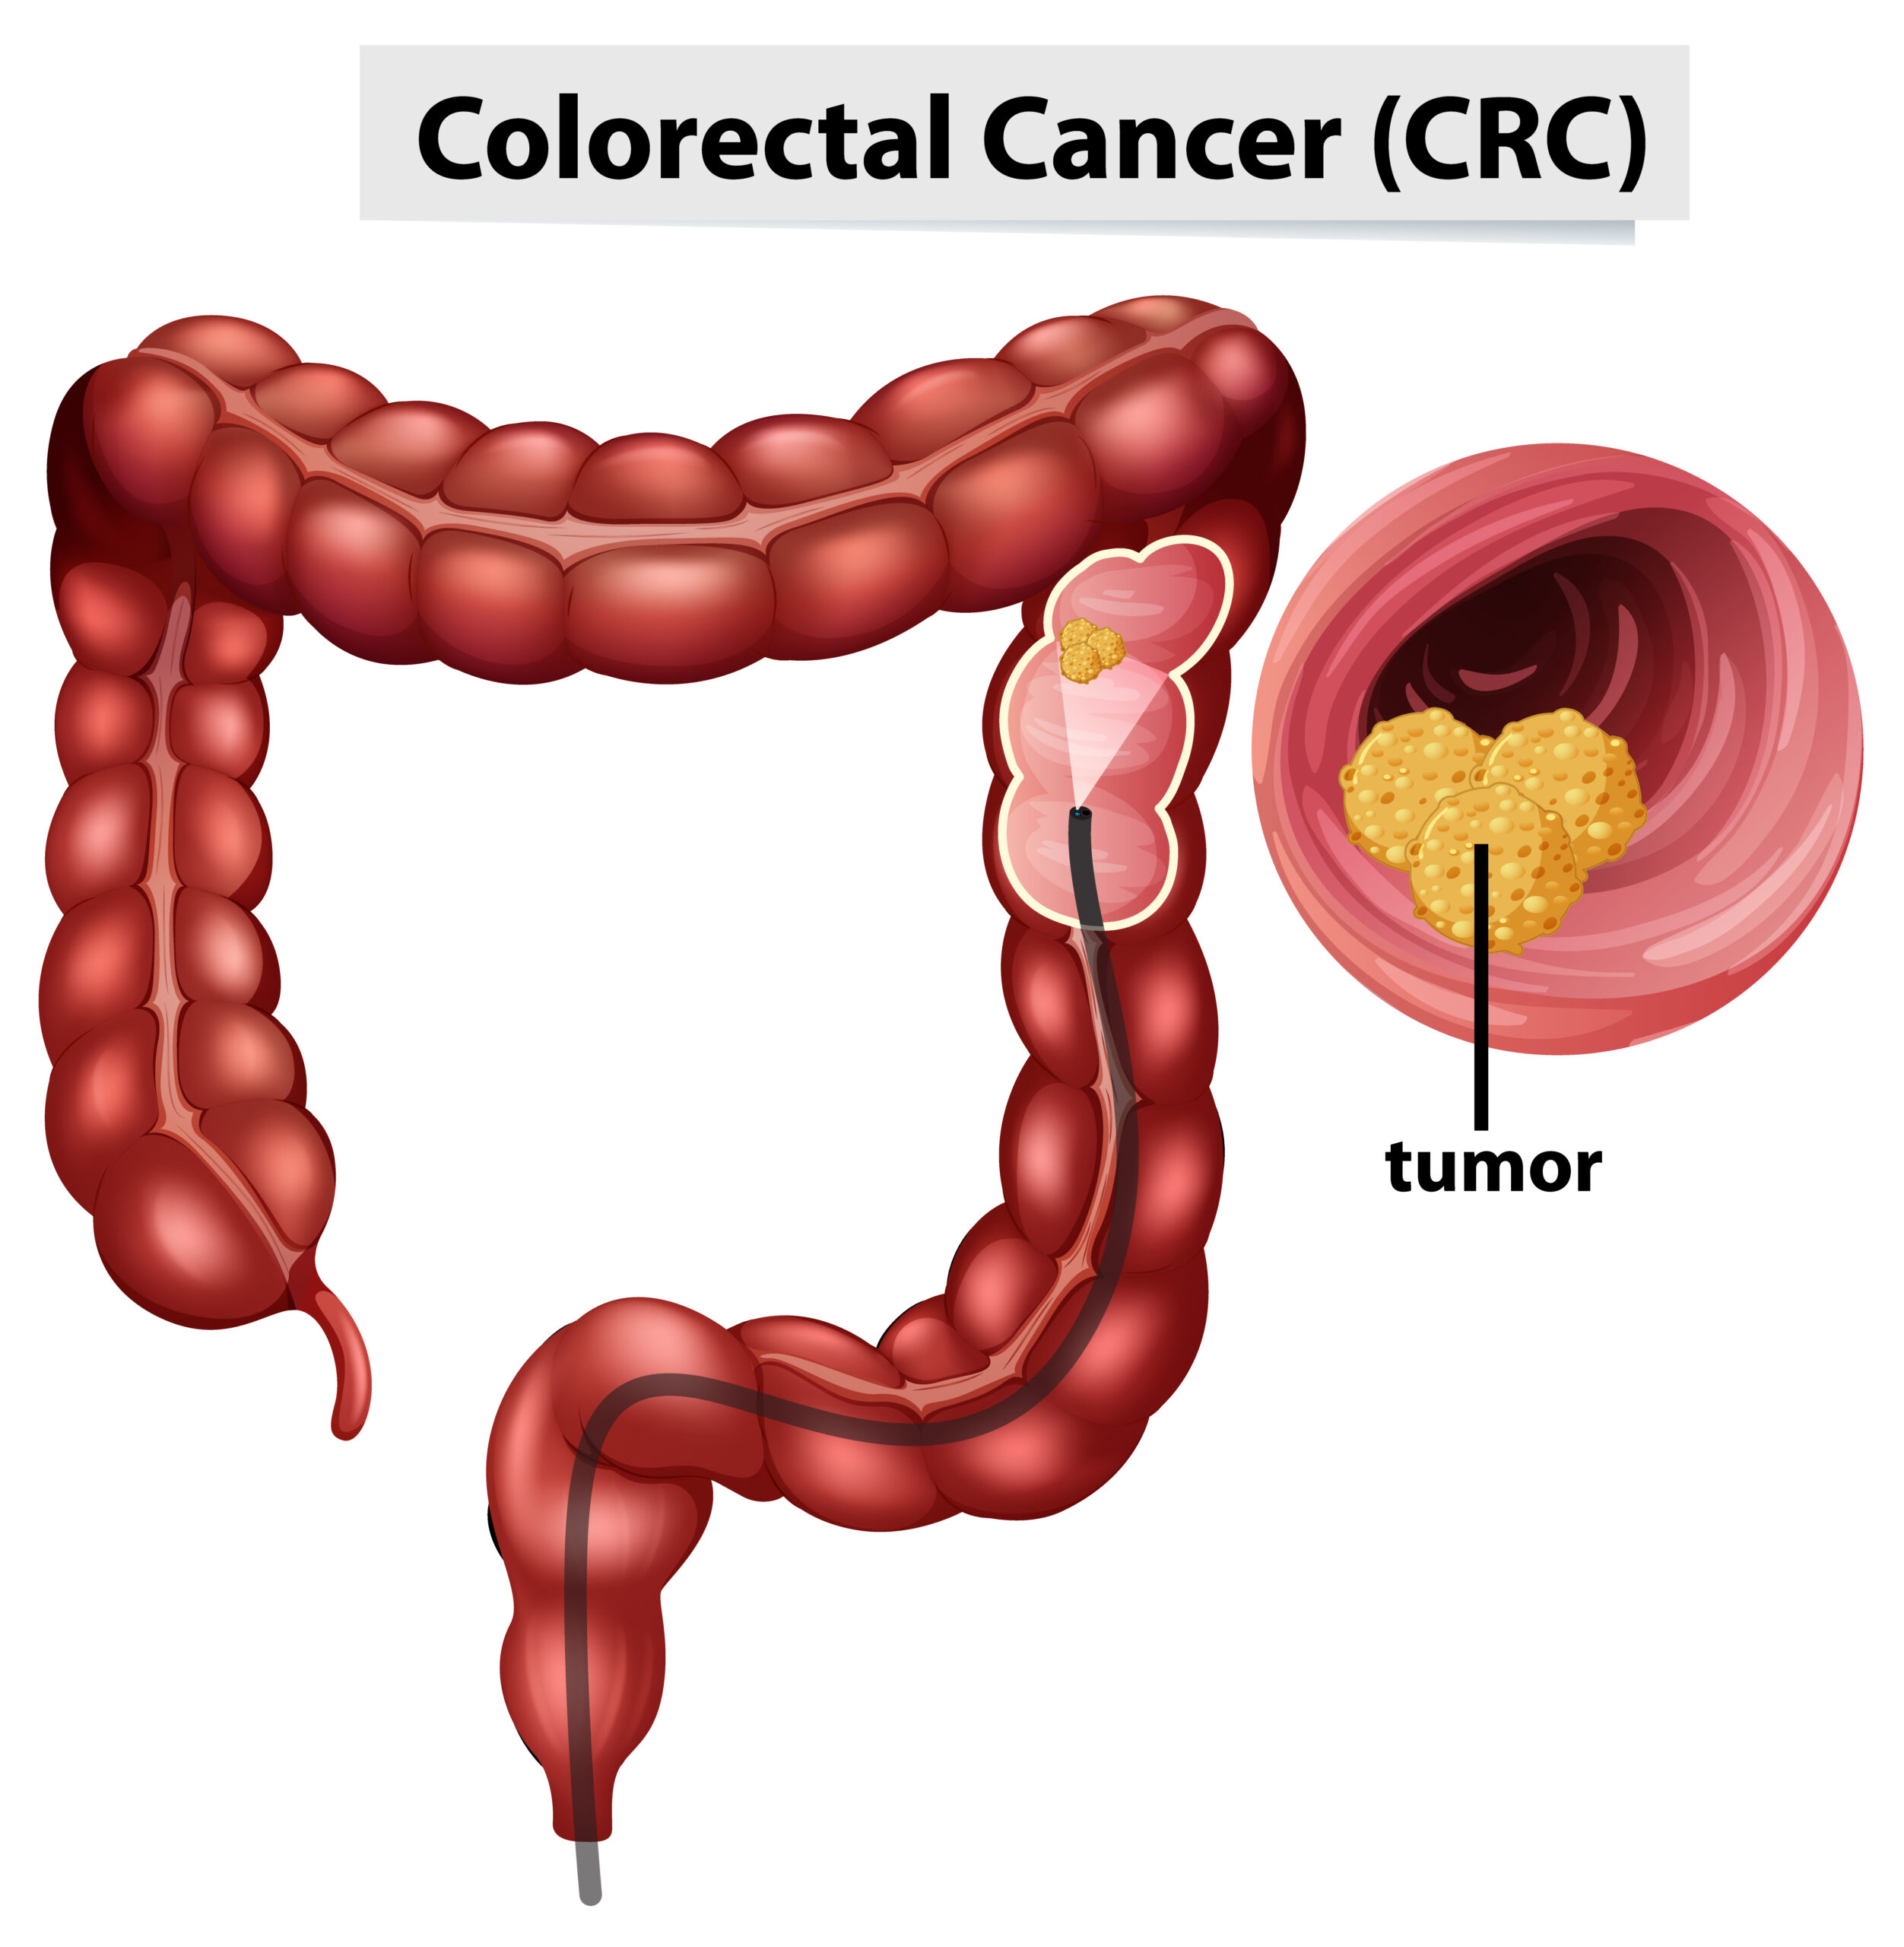 What Is Colon and Rectal Cancer (Colorectal Cancer)?